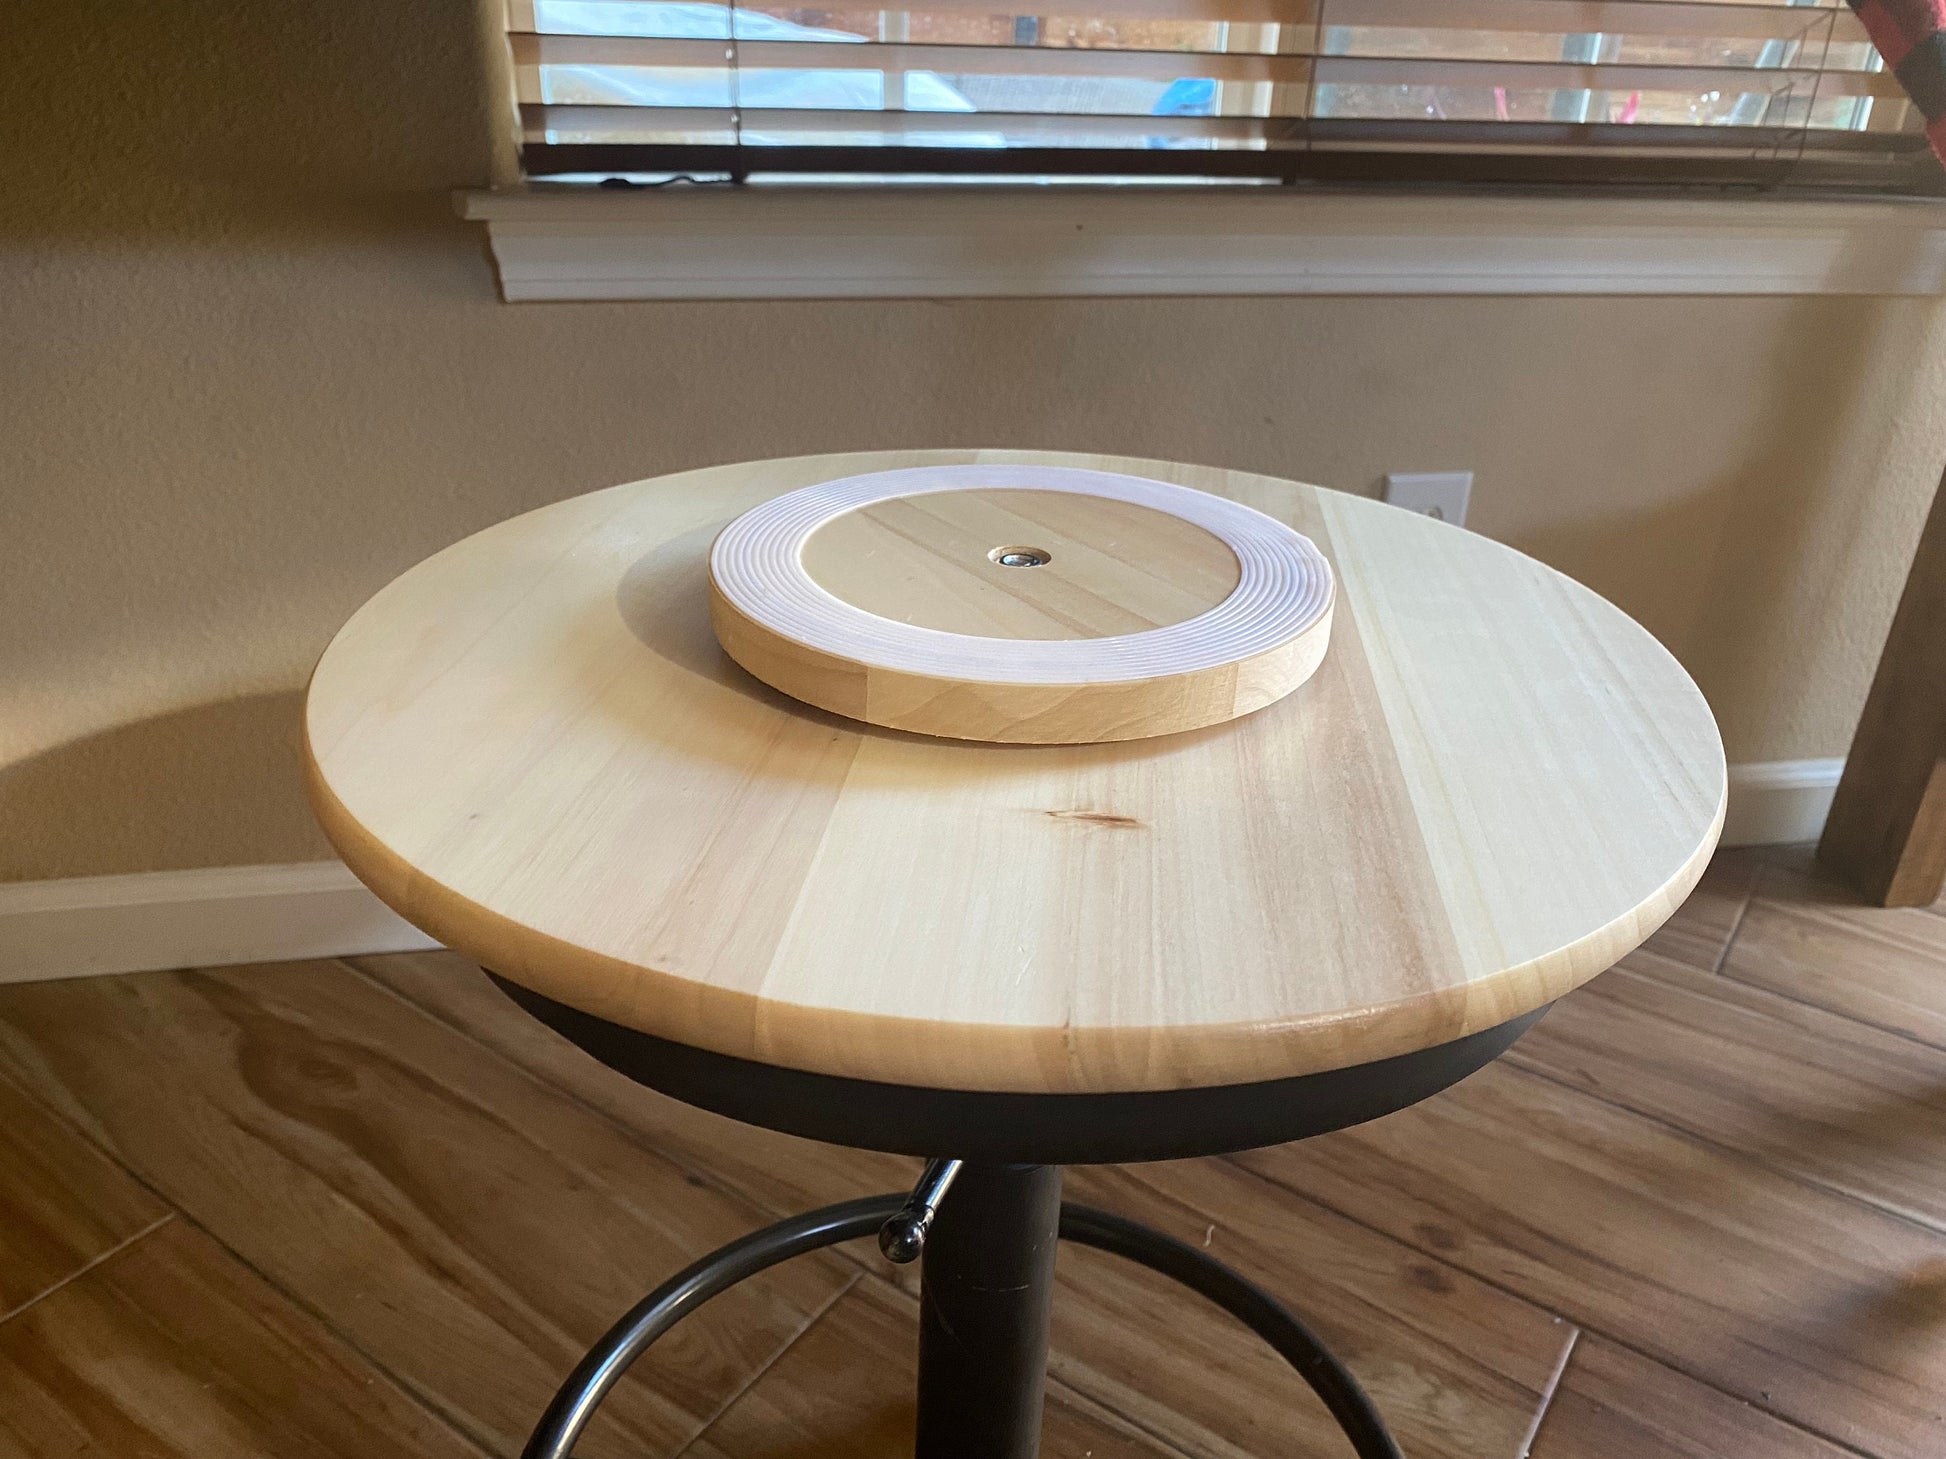 Custom Pine 15" Lazy Susan | Customized Kitchen and Dining Gifts | Custom Centerpiece